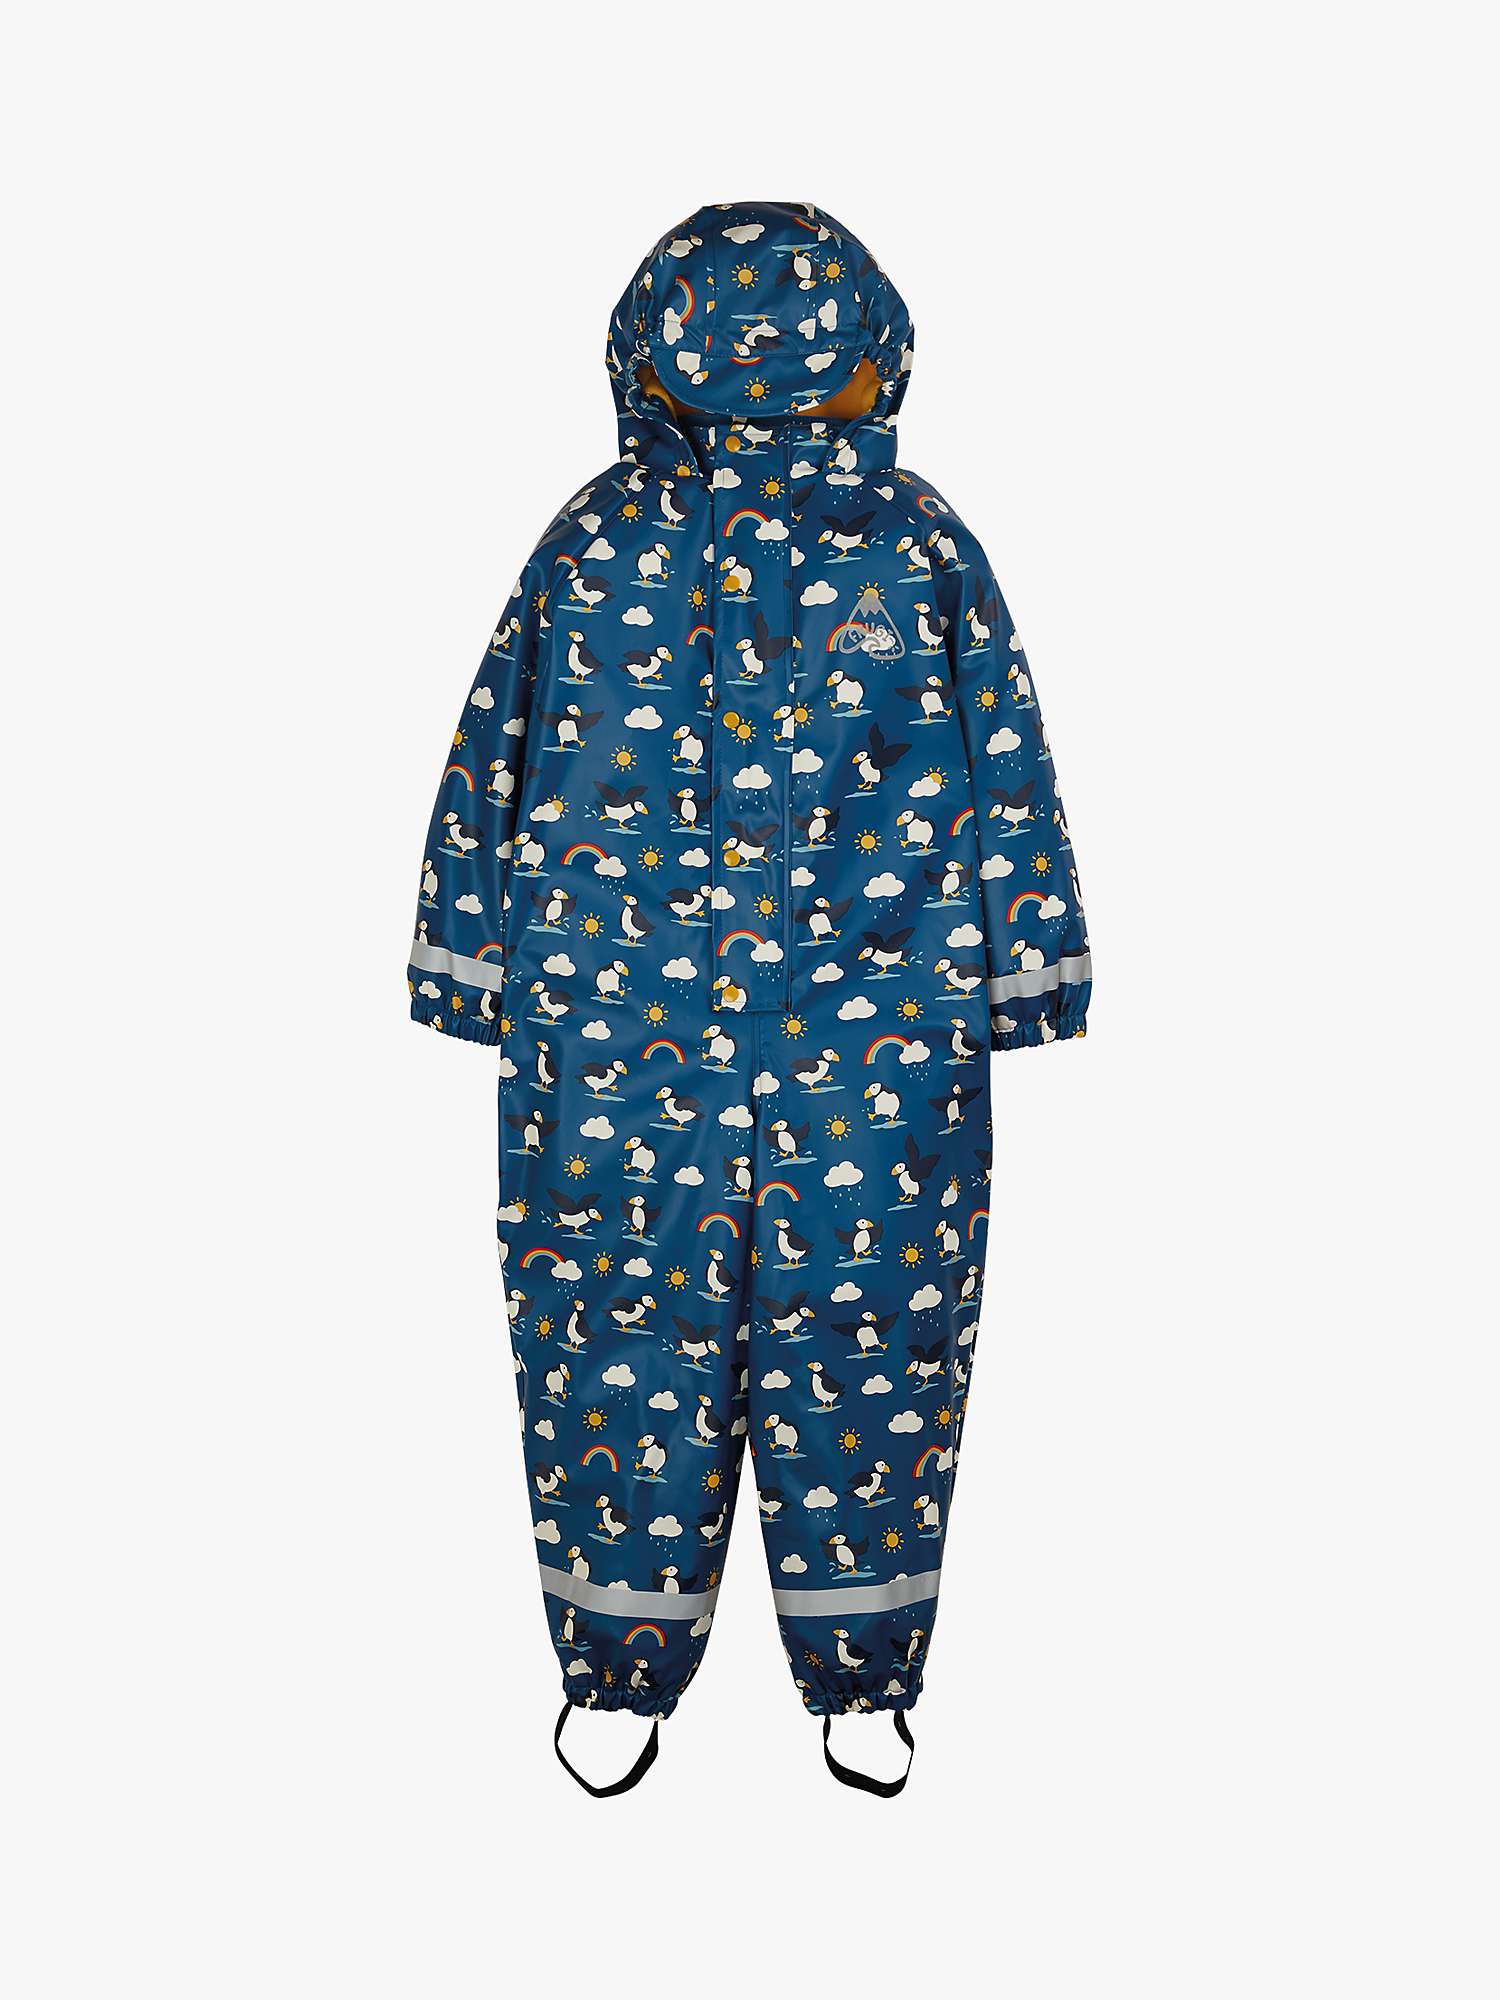 Buy Frugi Baby Puffin Puddle Buster All-in-One Waterproof Suit, Blue/Multi Online at johnlewis.com